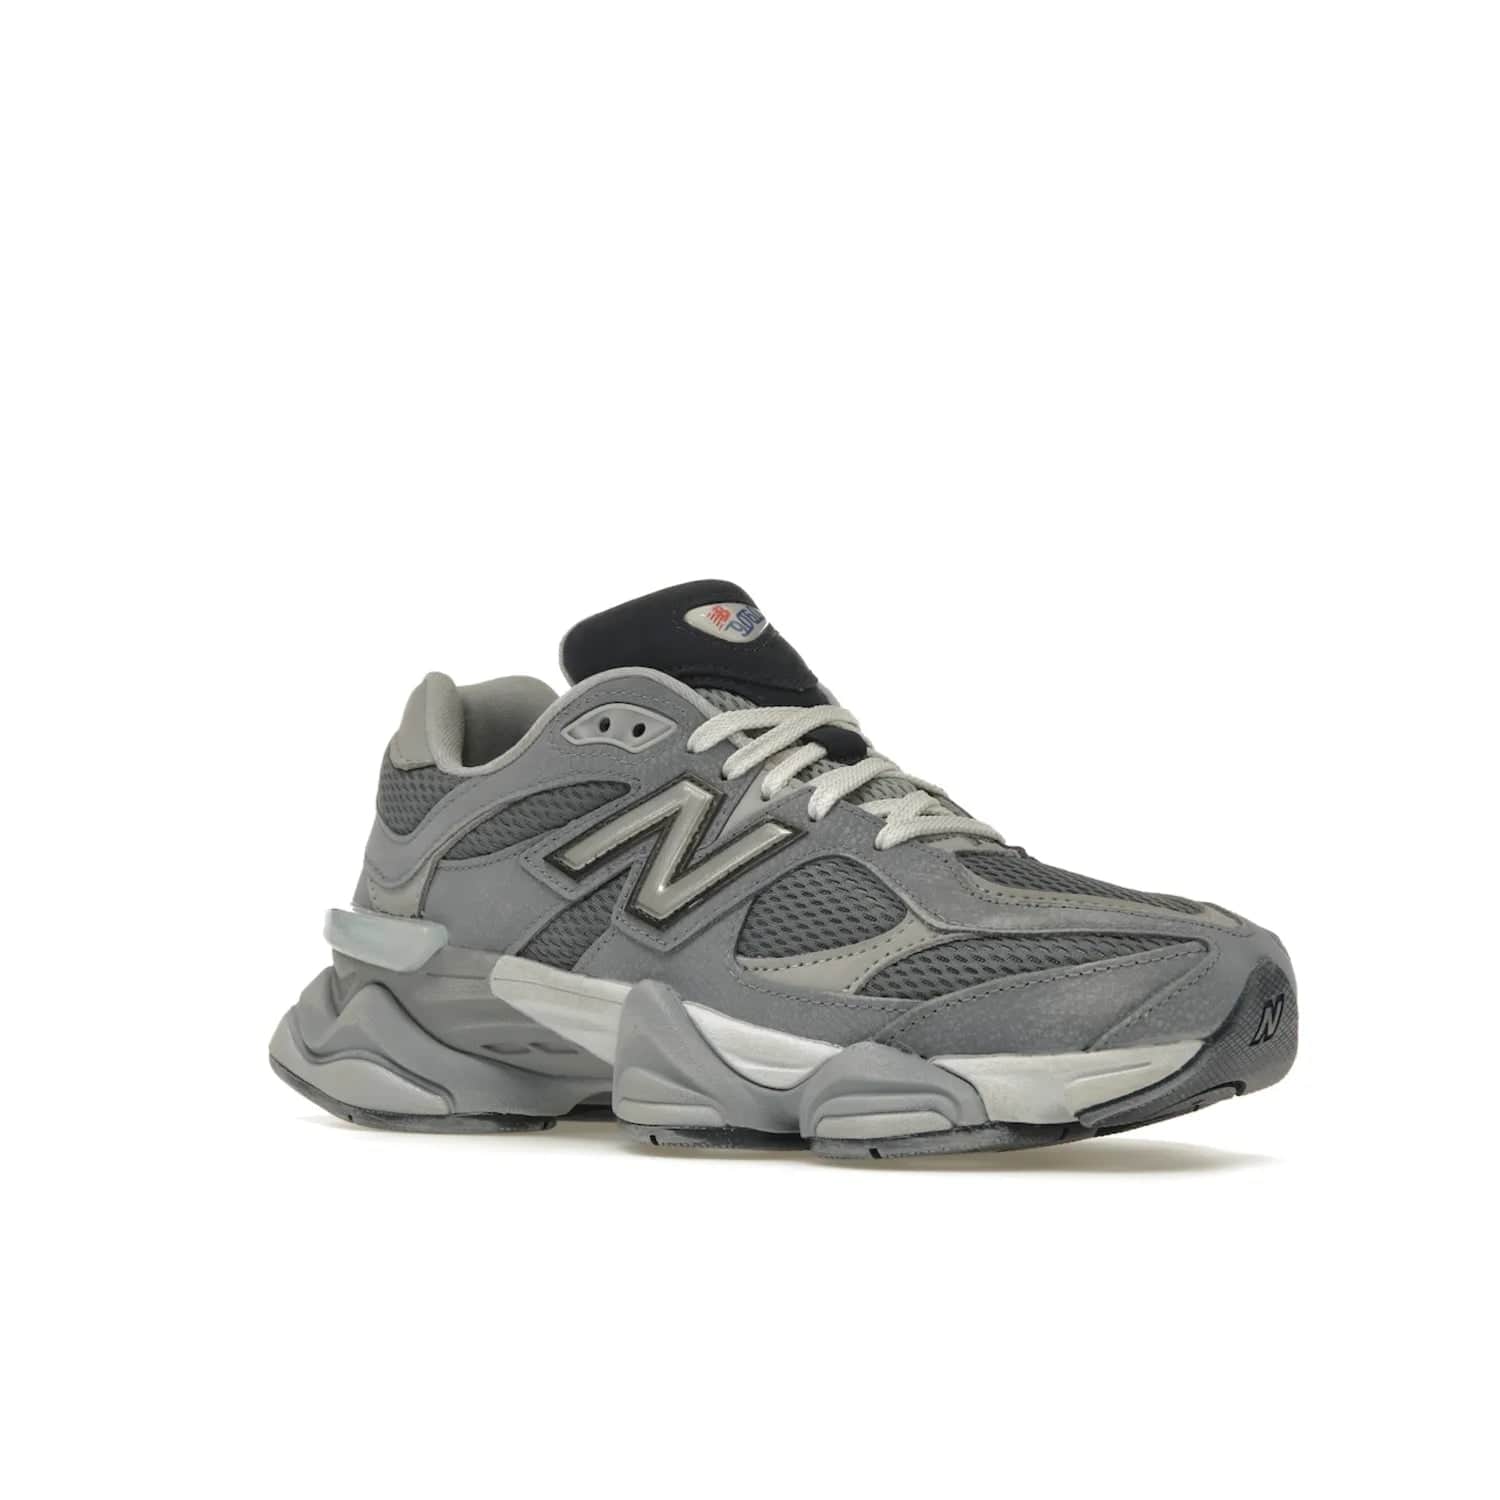 New Balance 9060 Grey Day (2023) - Image 5 - Only at www.BallersClubKickz.com - #
Sporty-meets-stylish in the New Balance 9060 Grey Day sneaker. Designed with Arctic Grey, Steel, and Silver Metallic, it offers an edgy but wearable look along with classic NB comfort and quality.